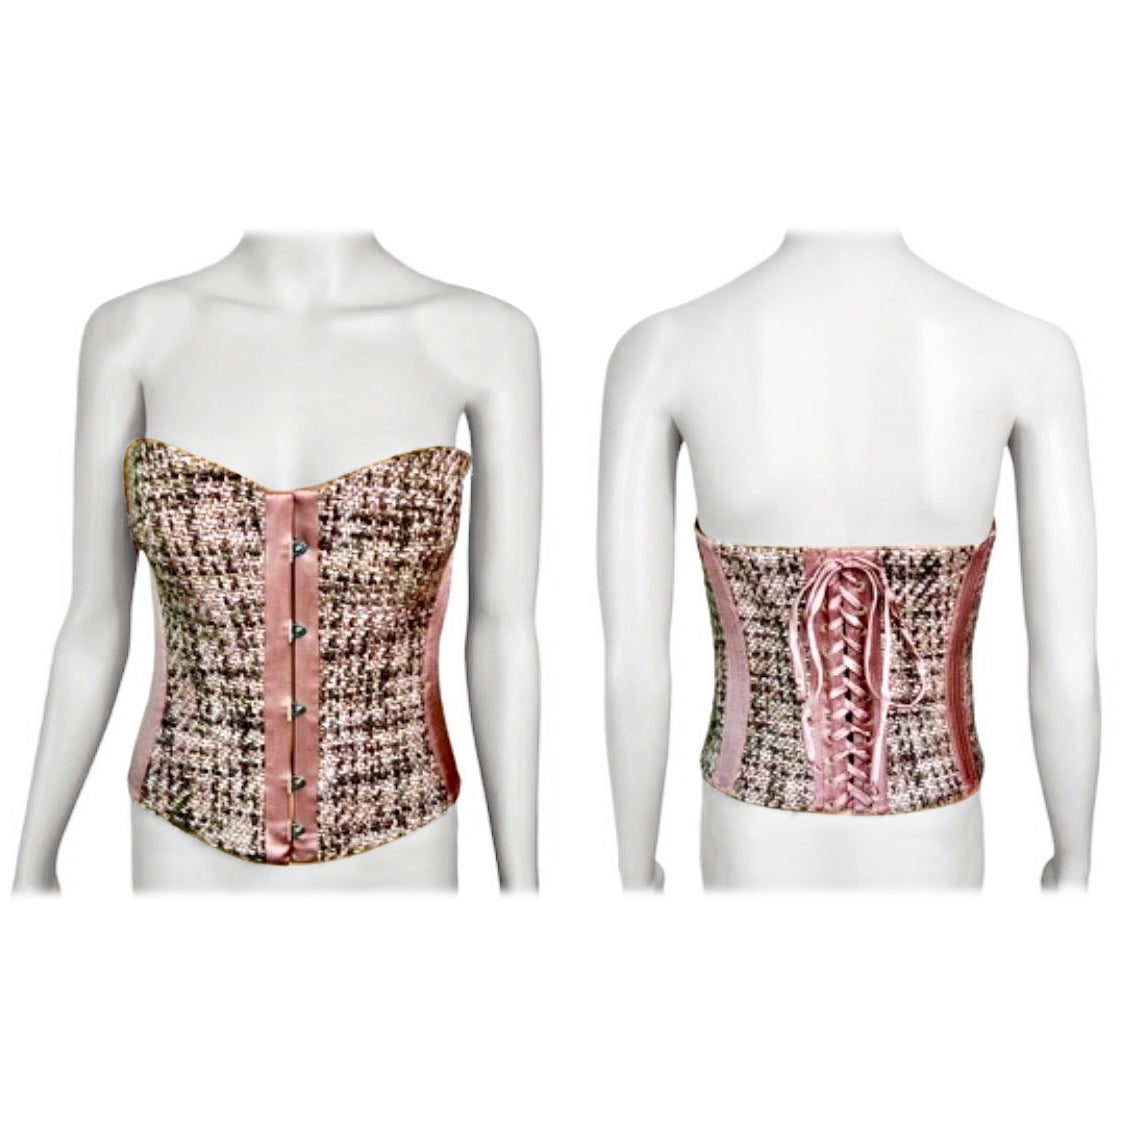 Roberto Cavalli c.2005 Bustier Tweed Satin Lace Up Corset Top & Blazer Jacket 2 Piece Set Ensemble Size IT 42

Roberto Cavalli structured boned corset top featuring tweed and satin panels, hook eye closure in front, and lace up back with gold tone